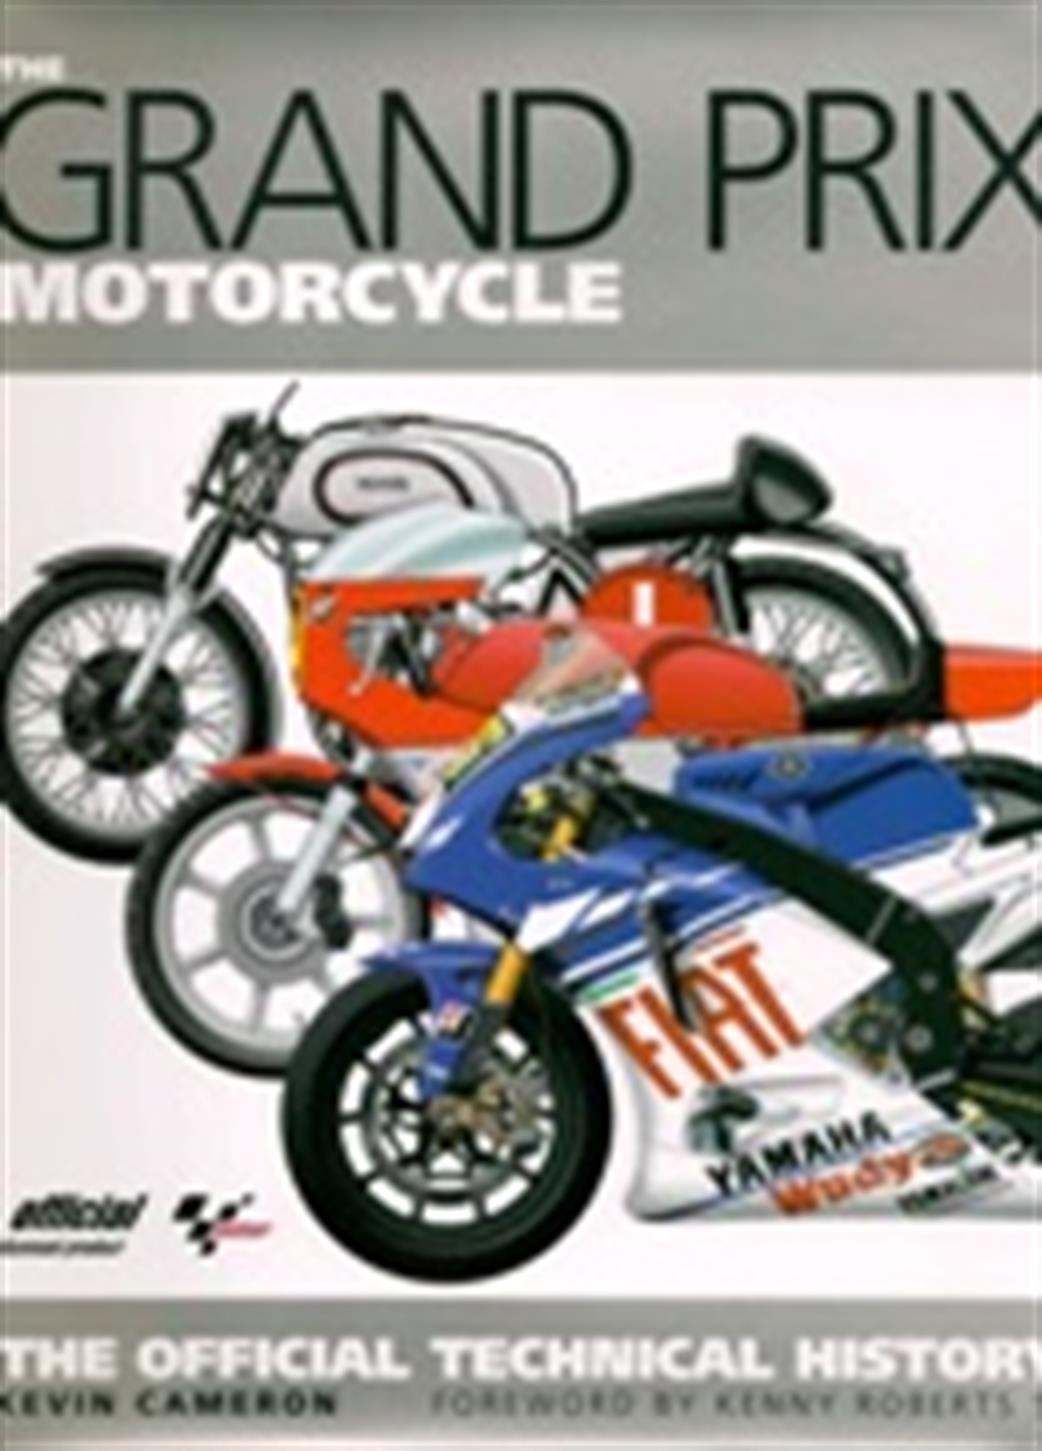 Crowood Press  9781844255283 The Grand Prix Motorcycle by Kevin Cameron